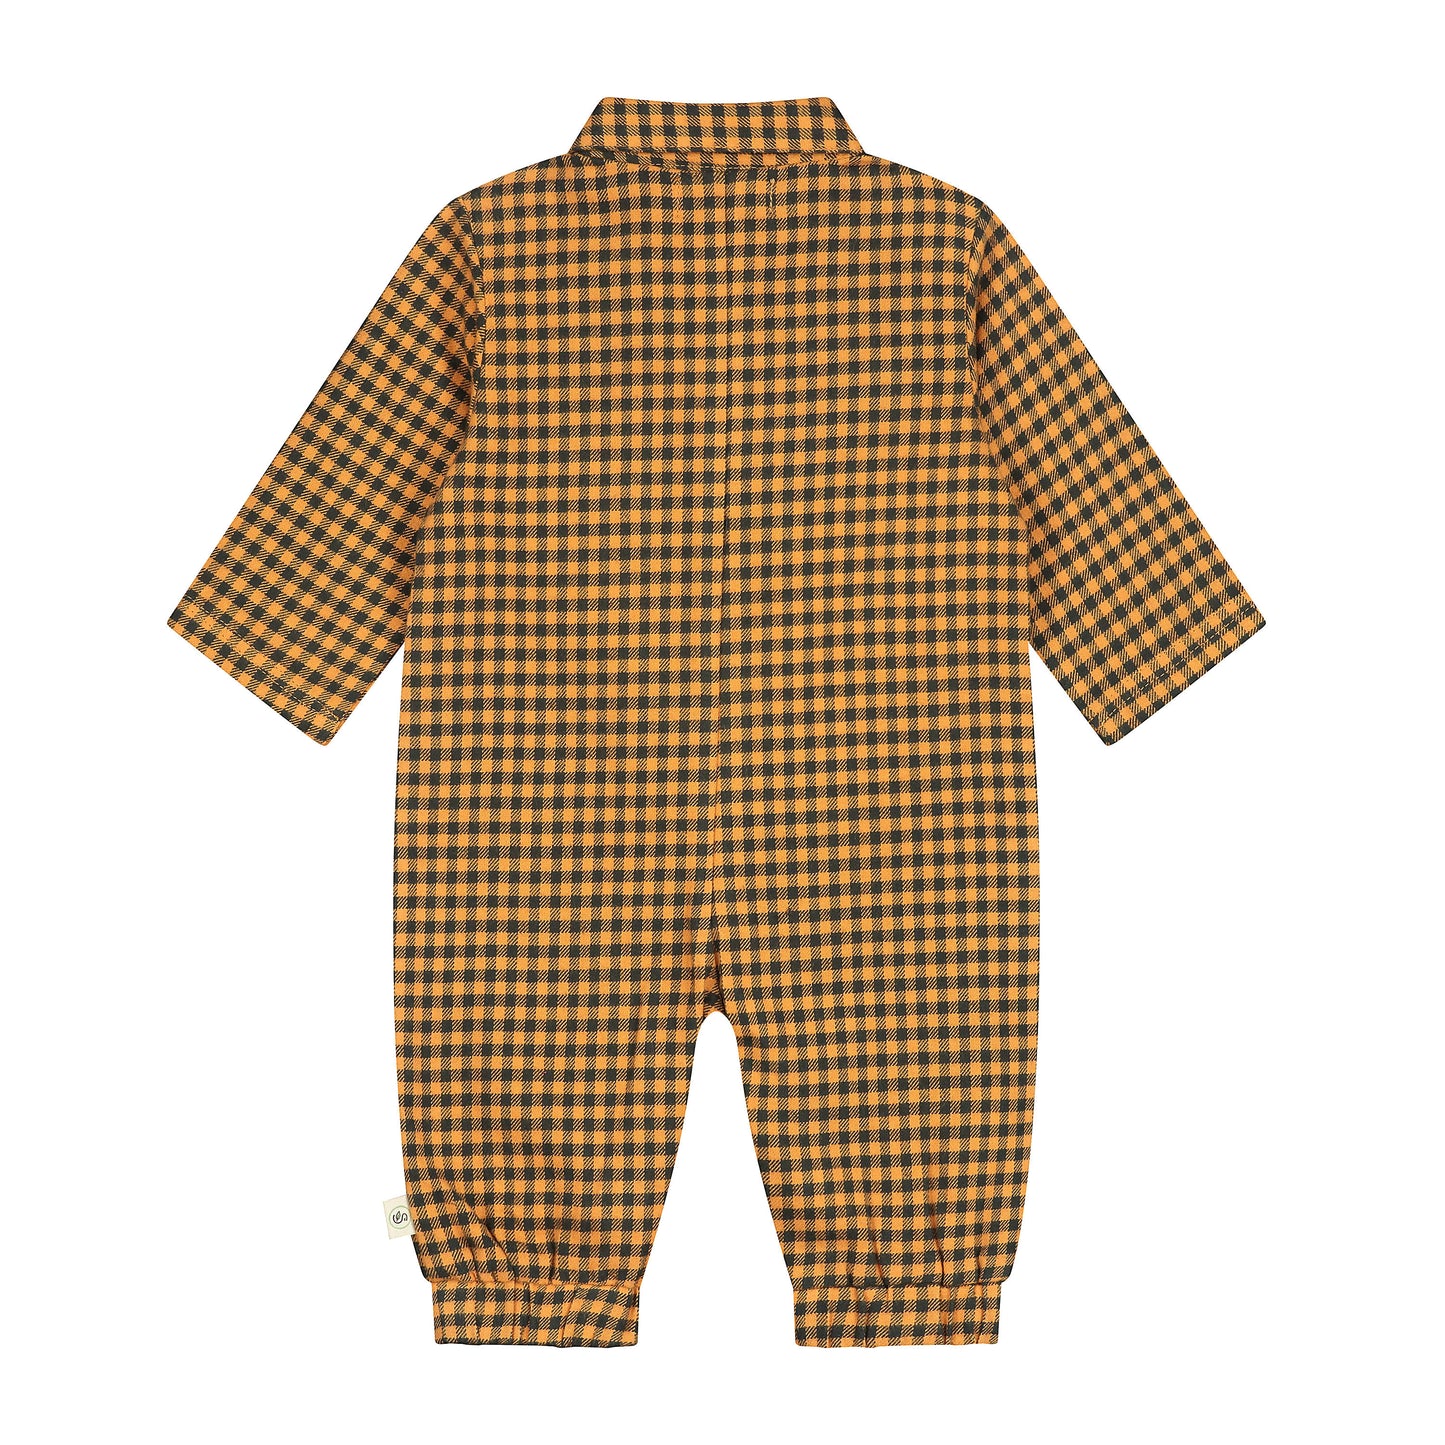 Brauner Flanell-Overall mit Vichy-Karomuster